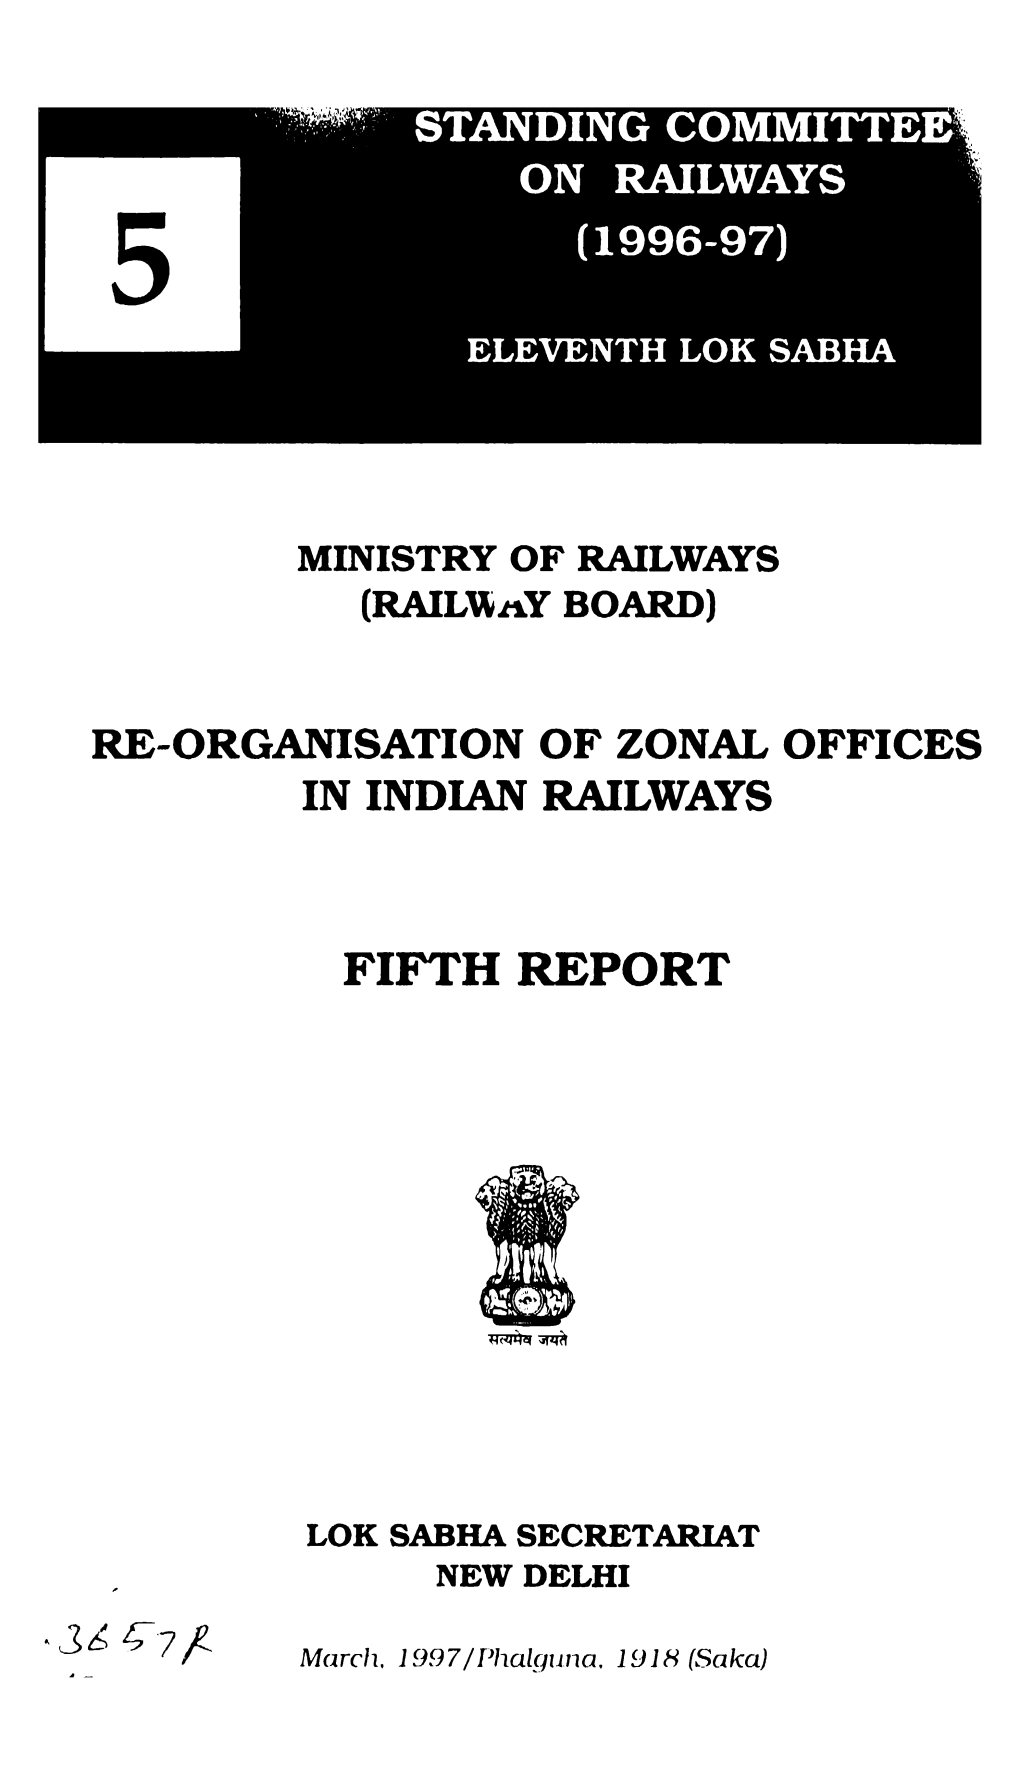 Re-Organisation of Zonal Offices in Indian Railways Fifth Report